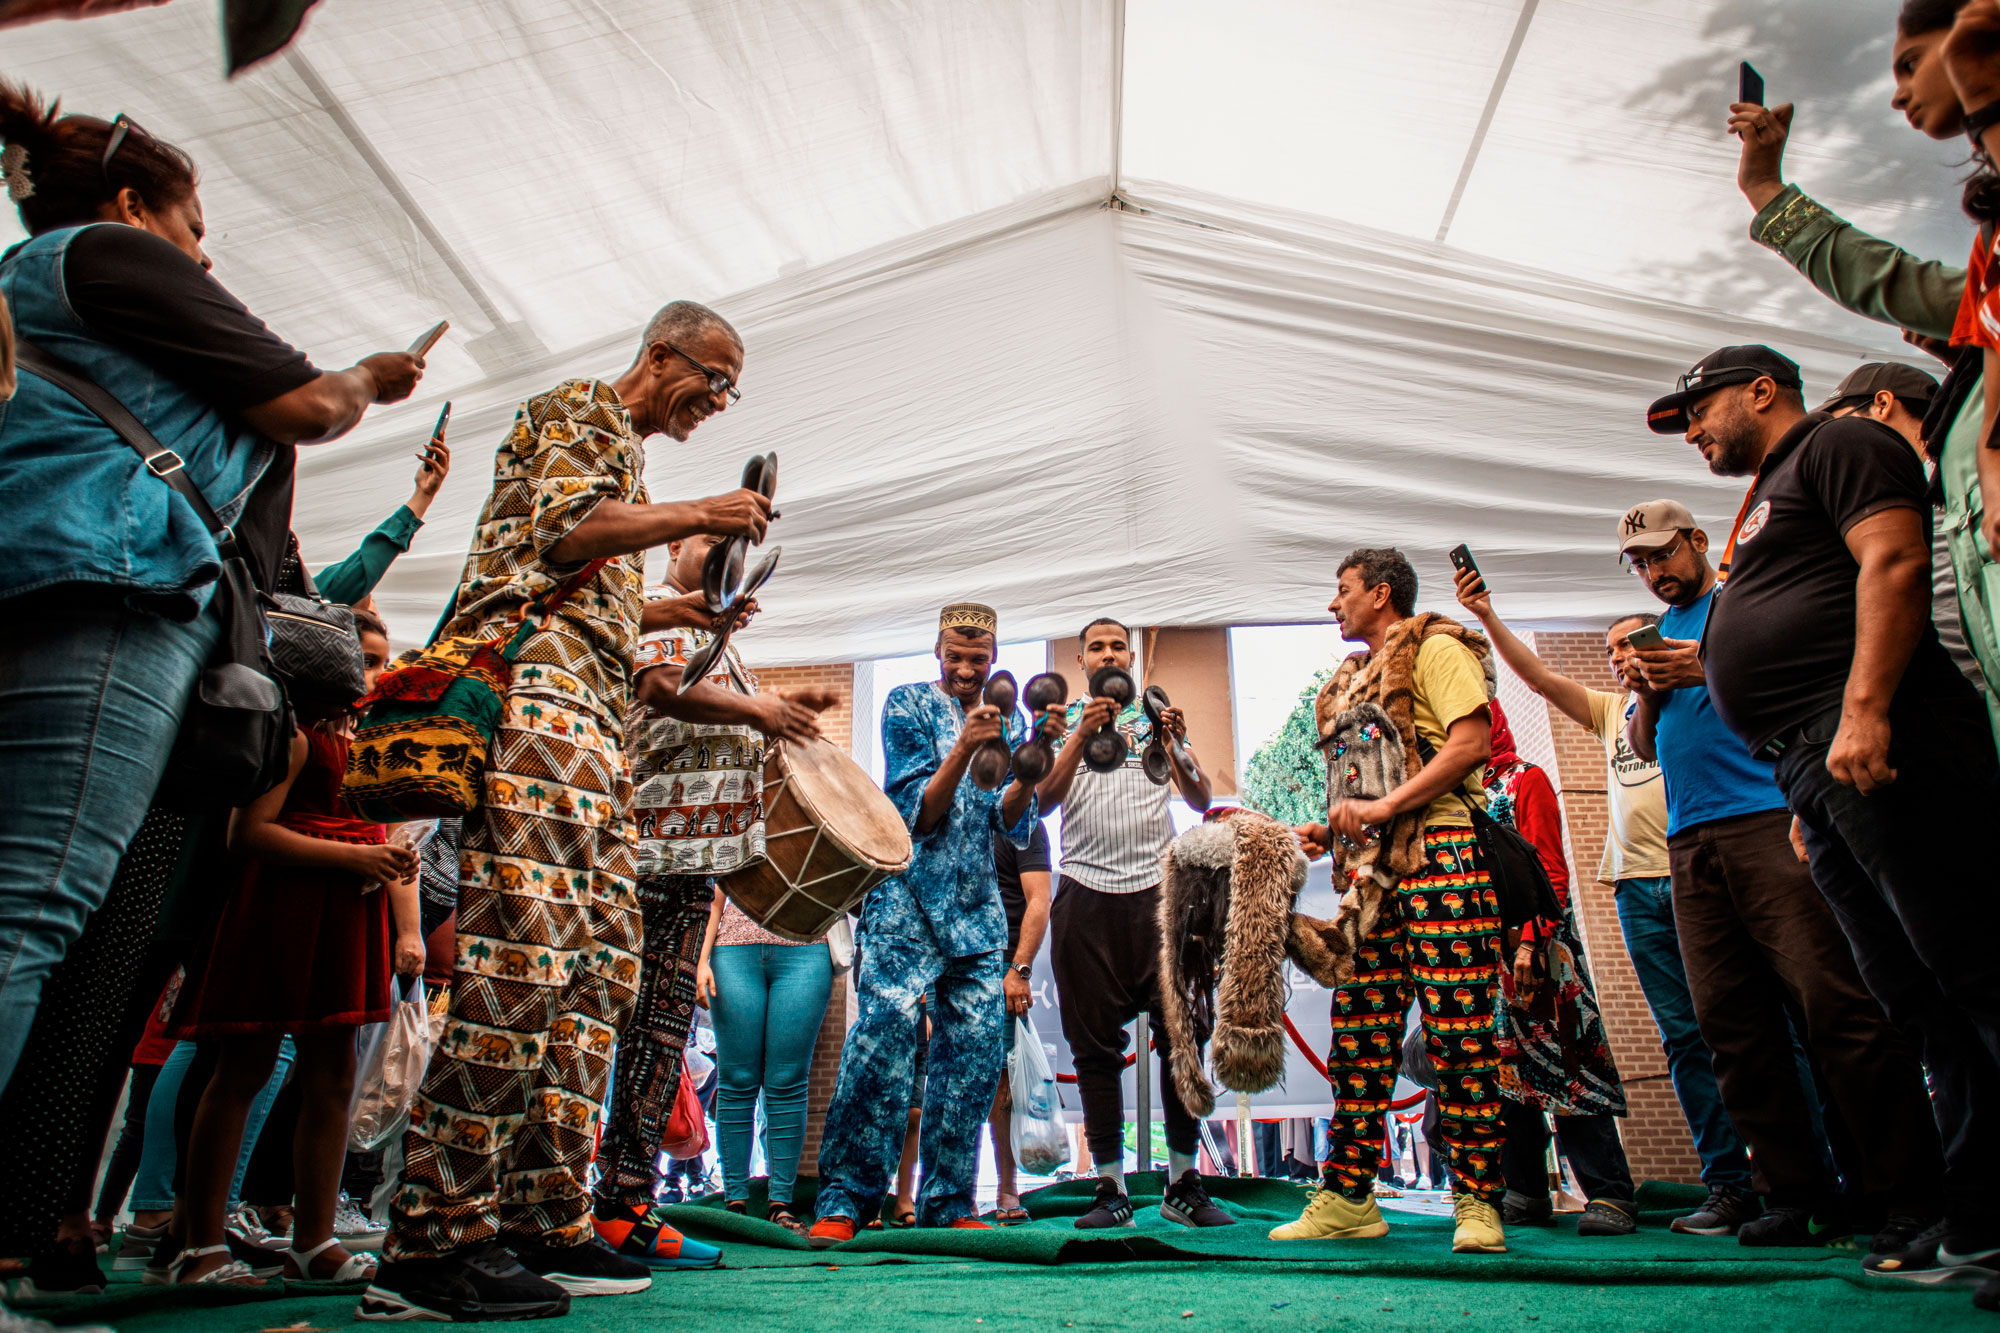 Four men stand together on a tented stage playing percussive instruments. They are dressed in brightly patterned clothes and are filmed by people holding cellphones.